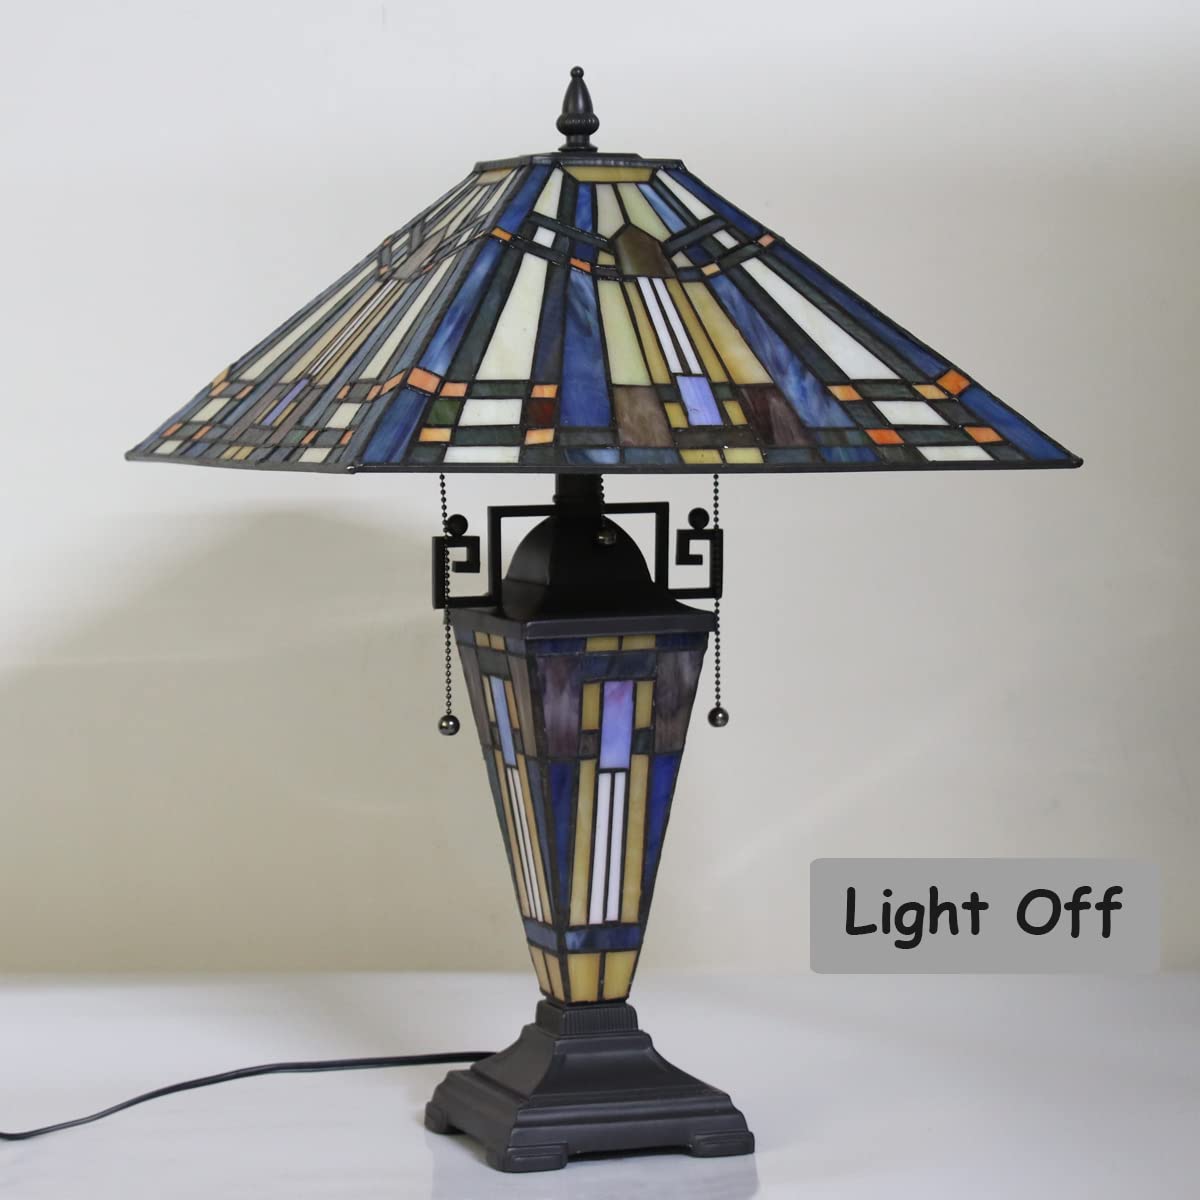 Vinplus  Table Lamp Night Light 16" Wide Handmade Stained Glass Lamp Shade 3 Light Blue Mission Style Vintage Table Lamp